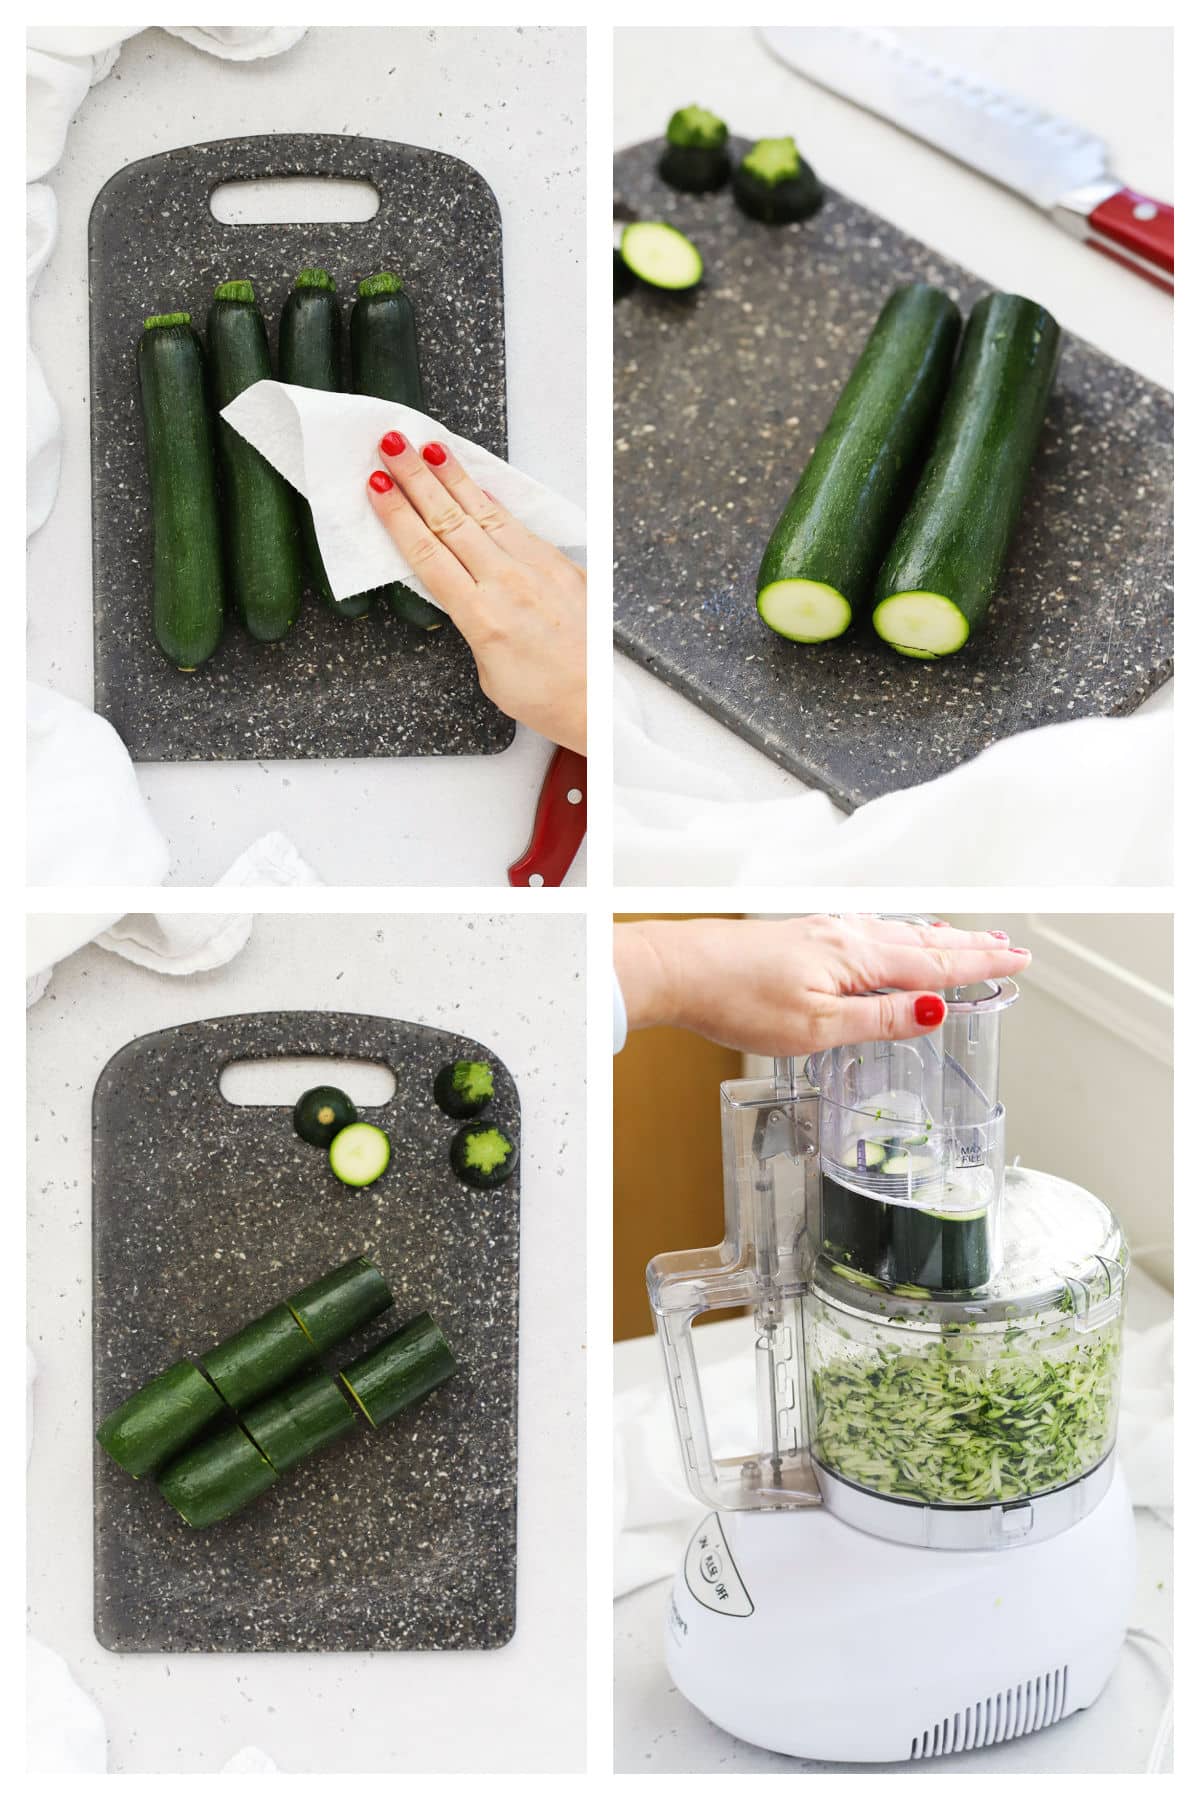 grating zucchini in a food processor, step by step